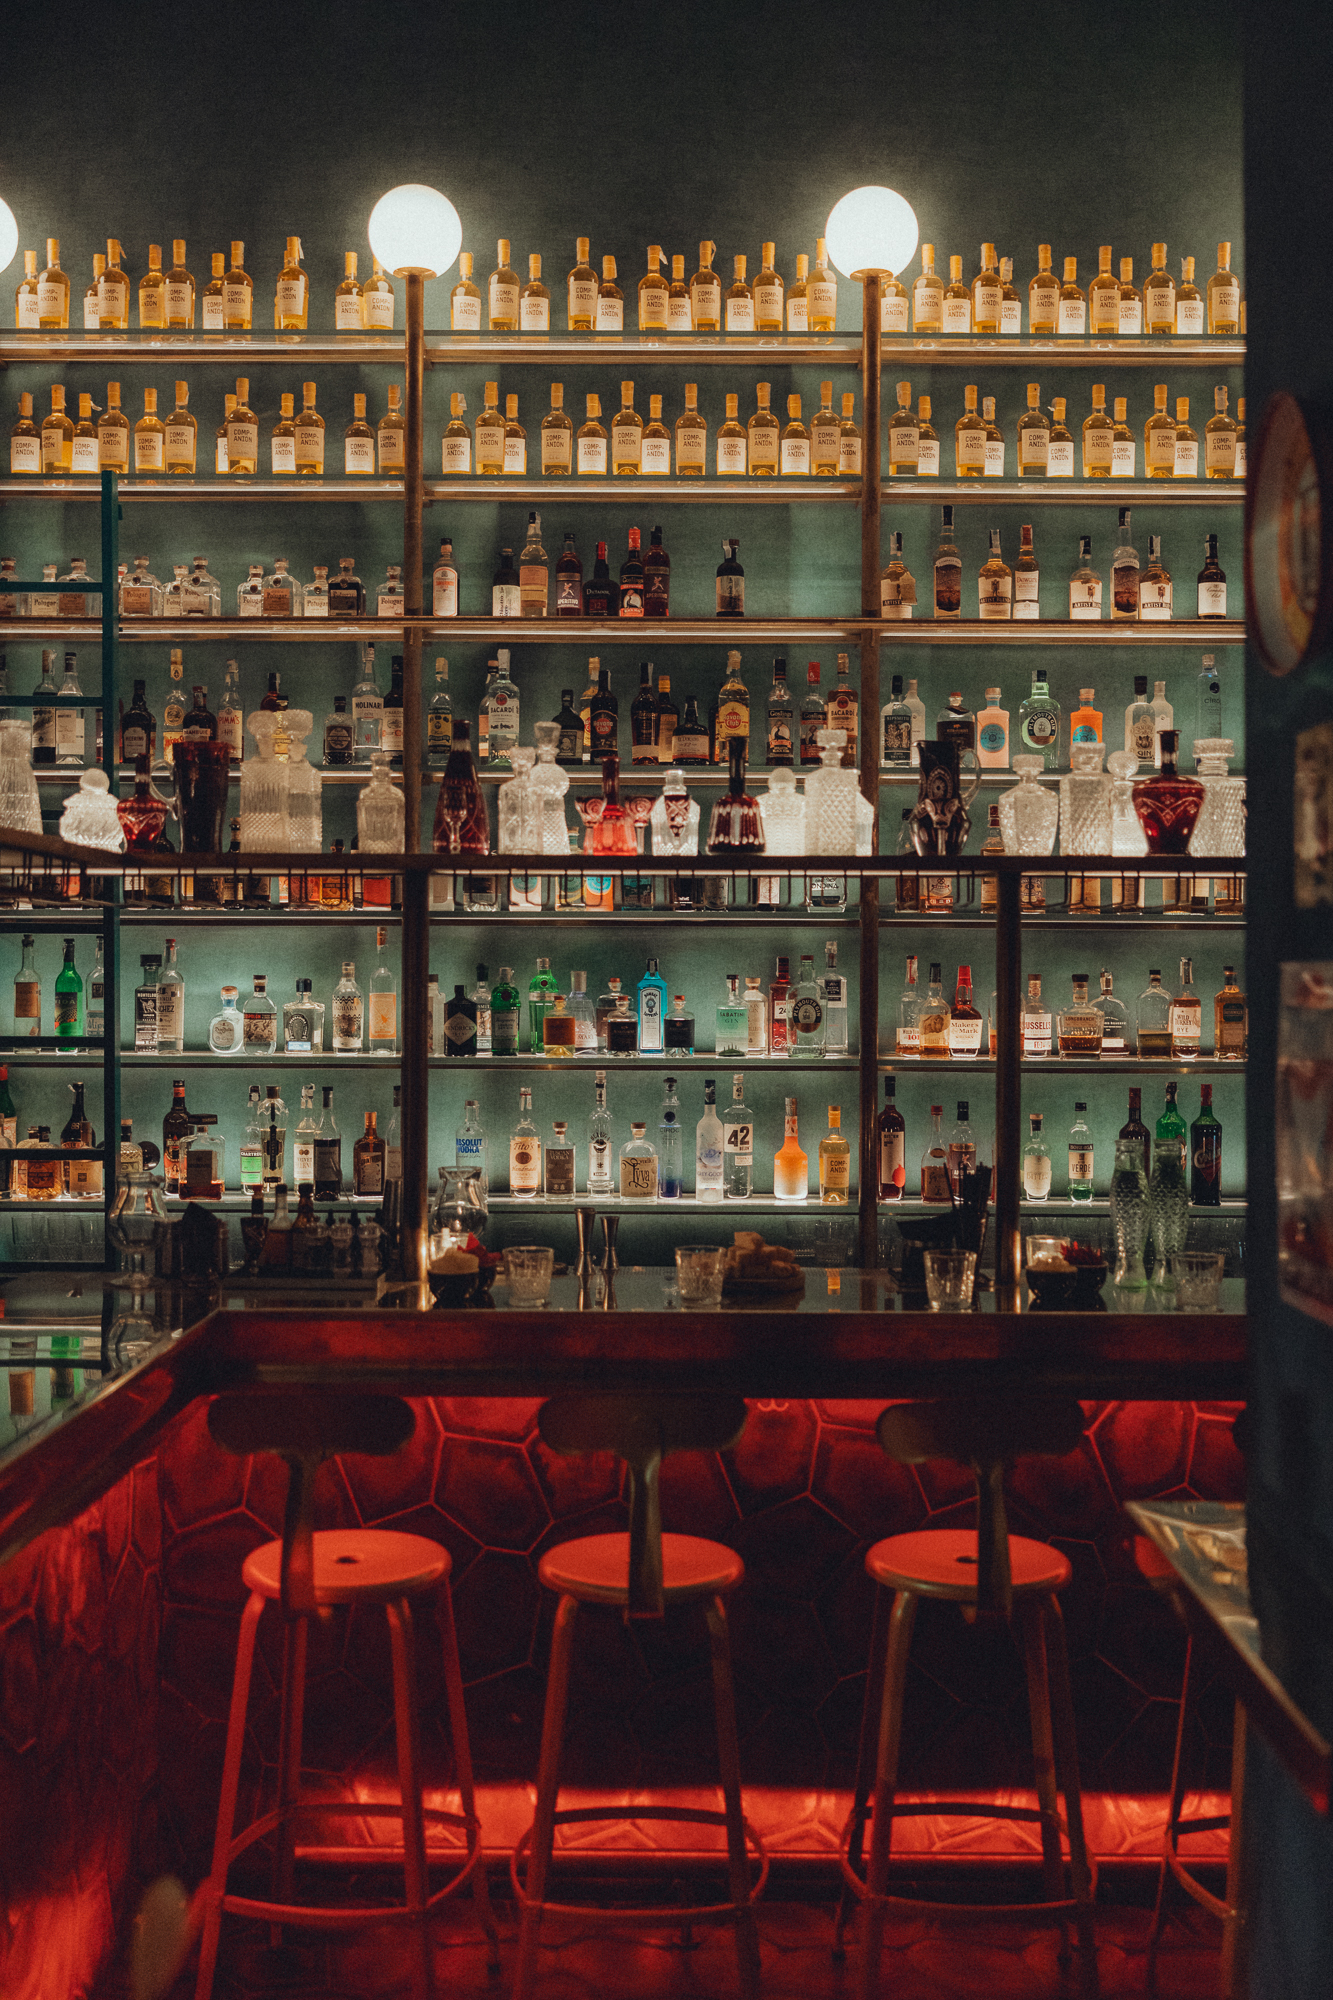 The bar counter with bar stools, on the wall are shelves with a wide selections of different liquors.